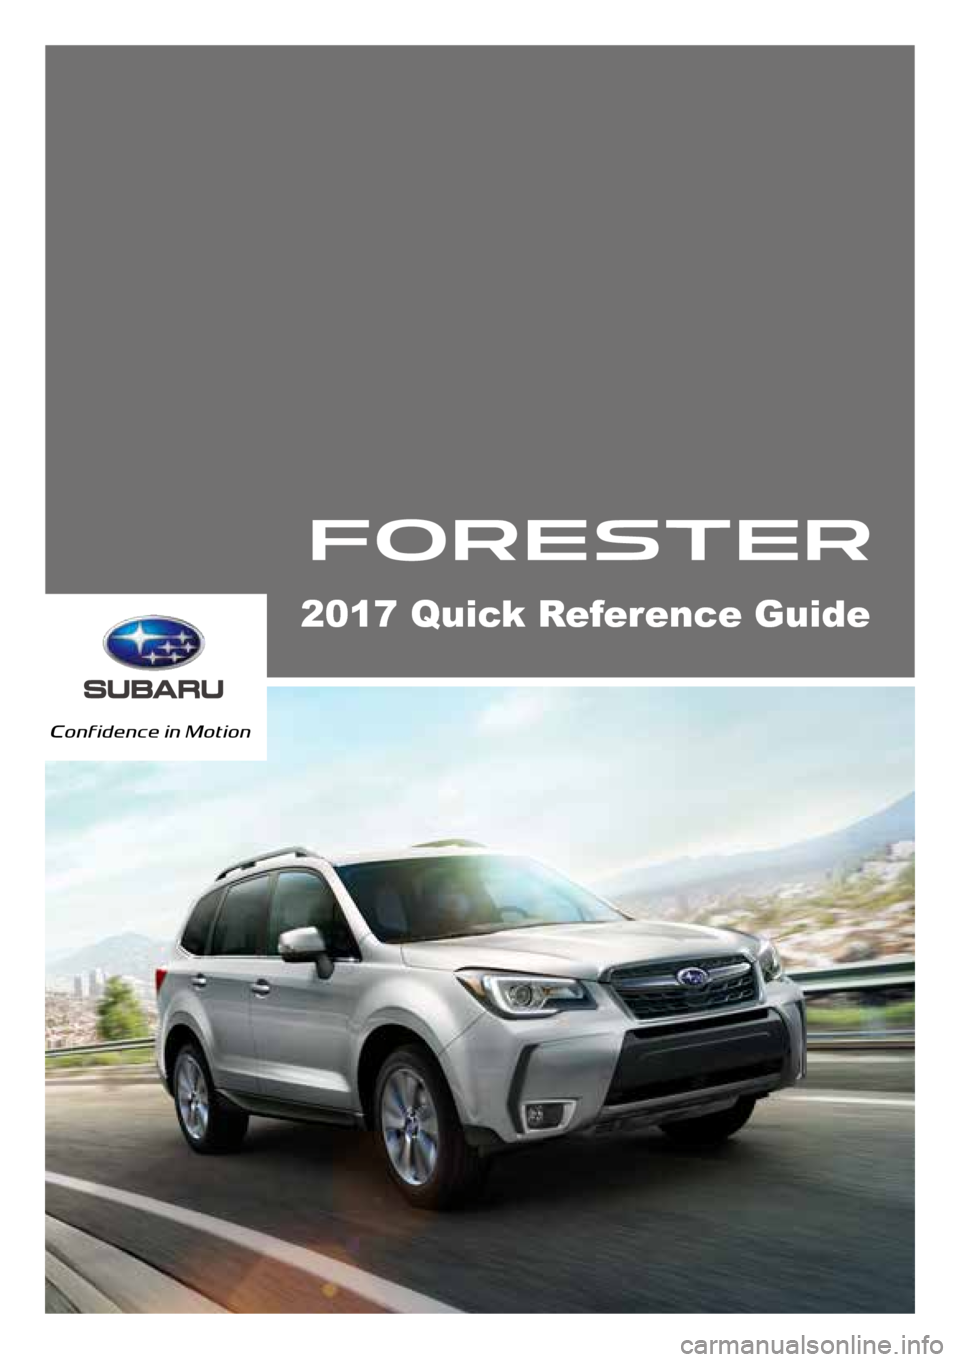 SUBARU FORESTER 2017 SJ / 4.G Quick Reference Guide 2017 Quick Reference Guide 